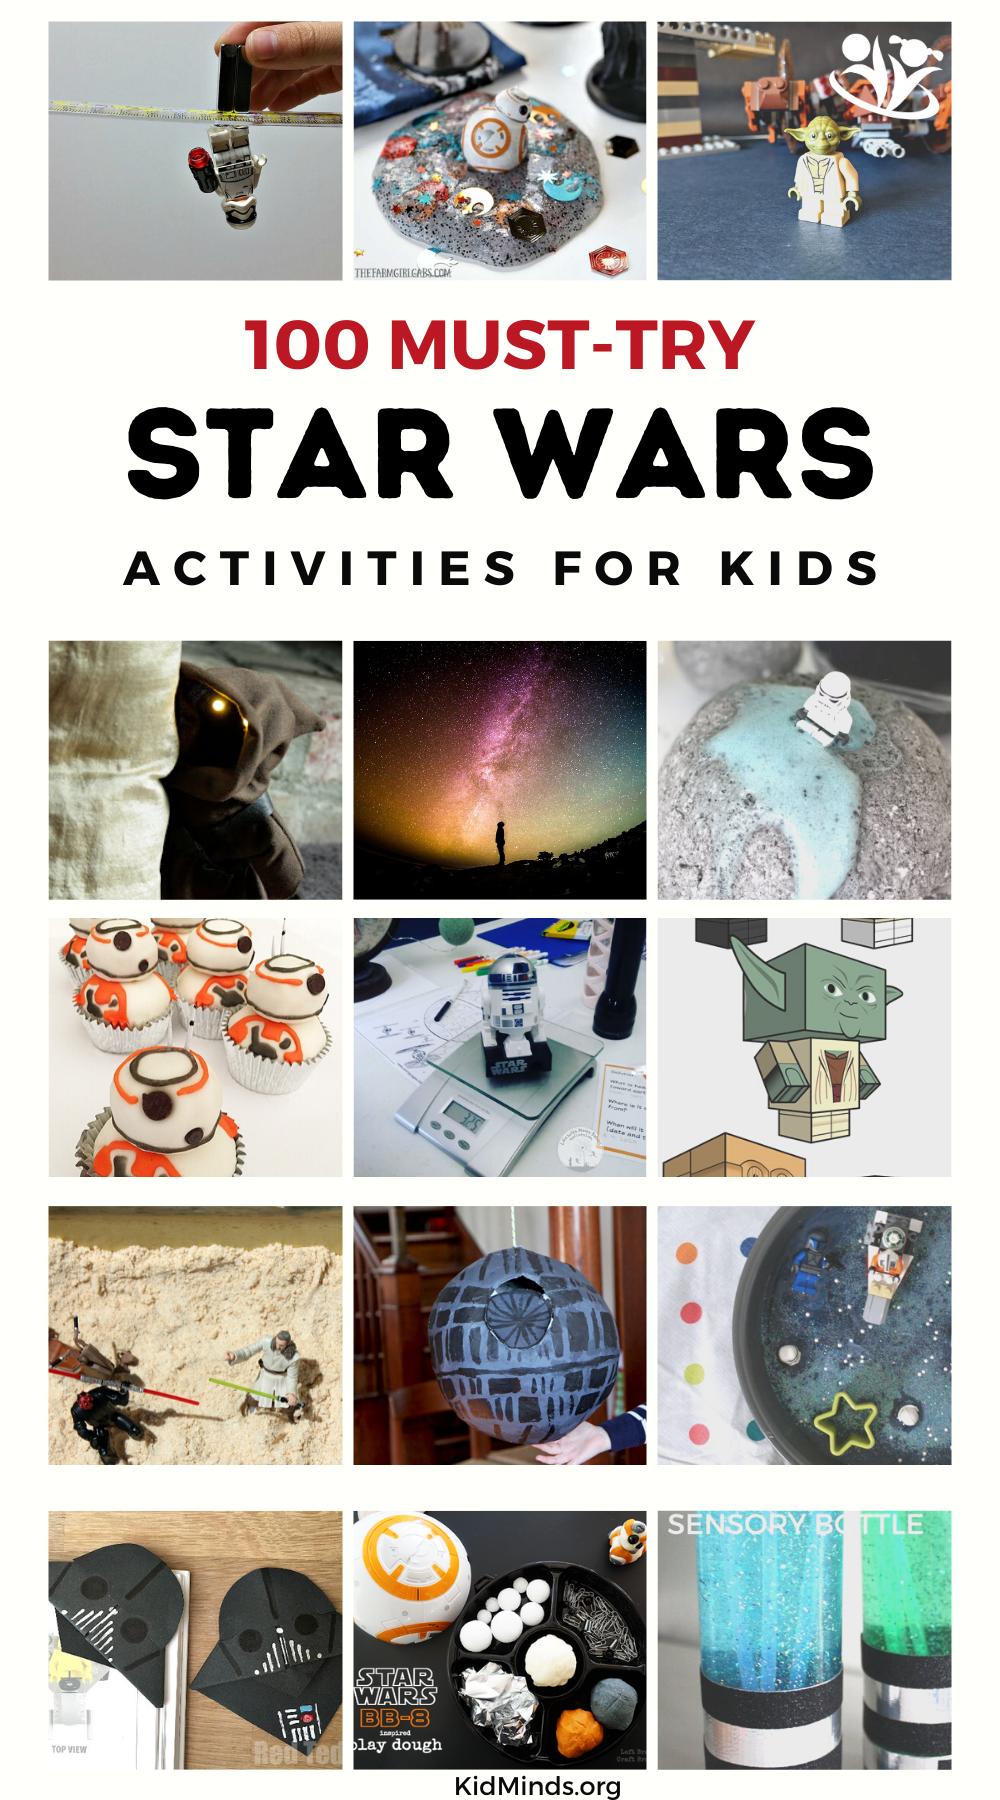 This is a collection of our favorite Star Wars activities. There’s something for every little Jedi in the universe. #STARWARS #science #kidsactivities #kidminds #laughingkidslearn #LEGO #STEAM